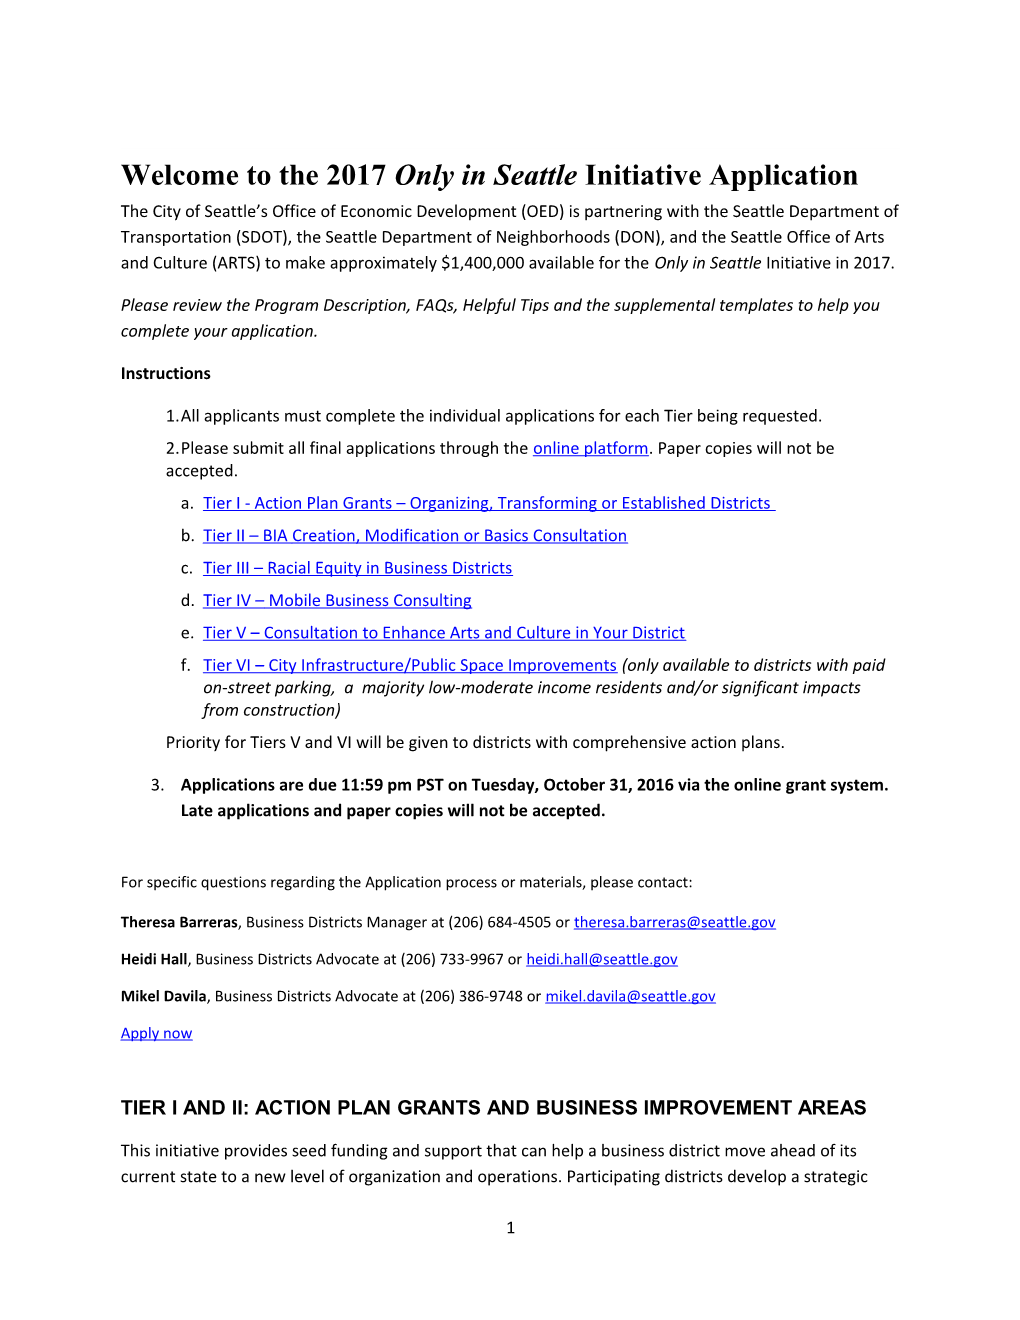 Welcome to the 2017Only in Seattleinitiative Application